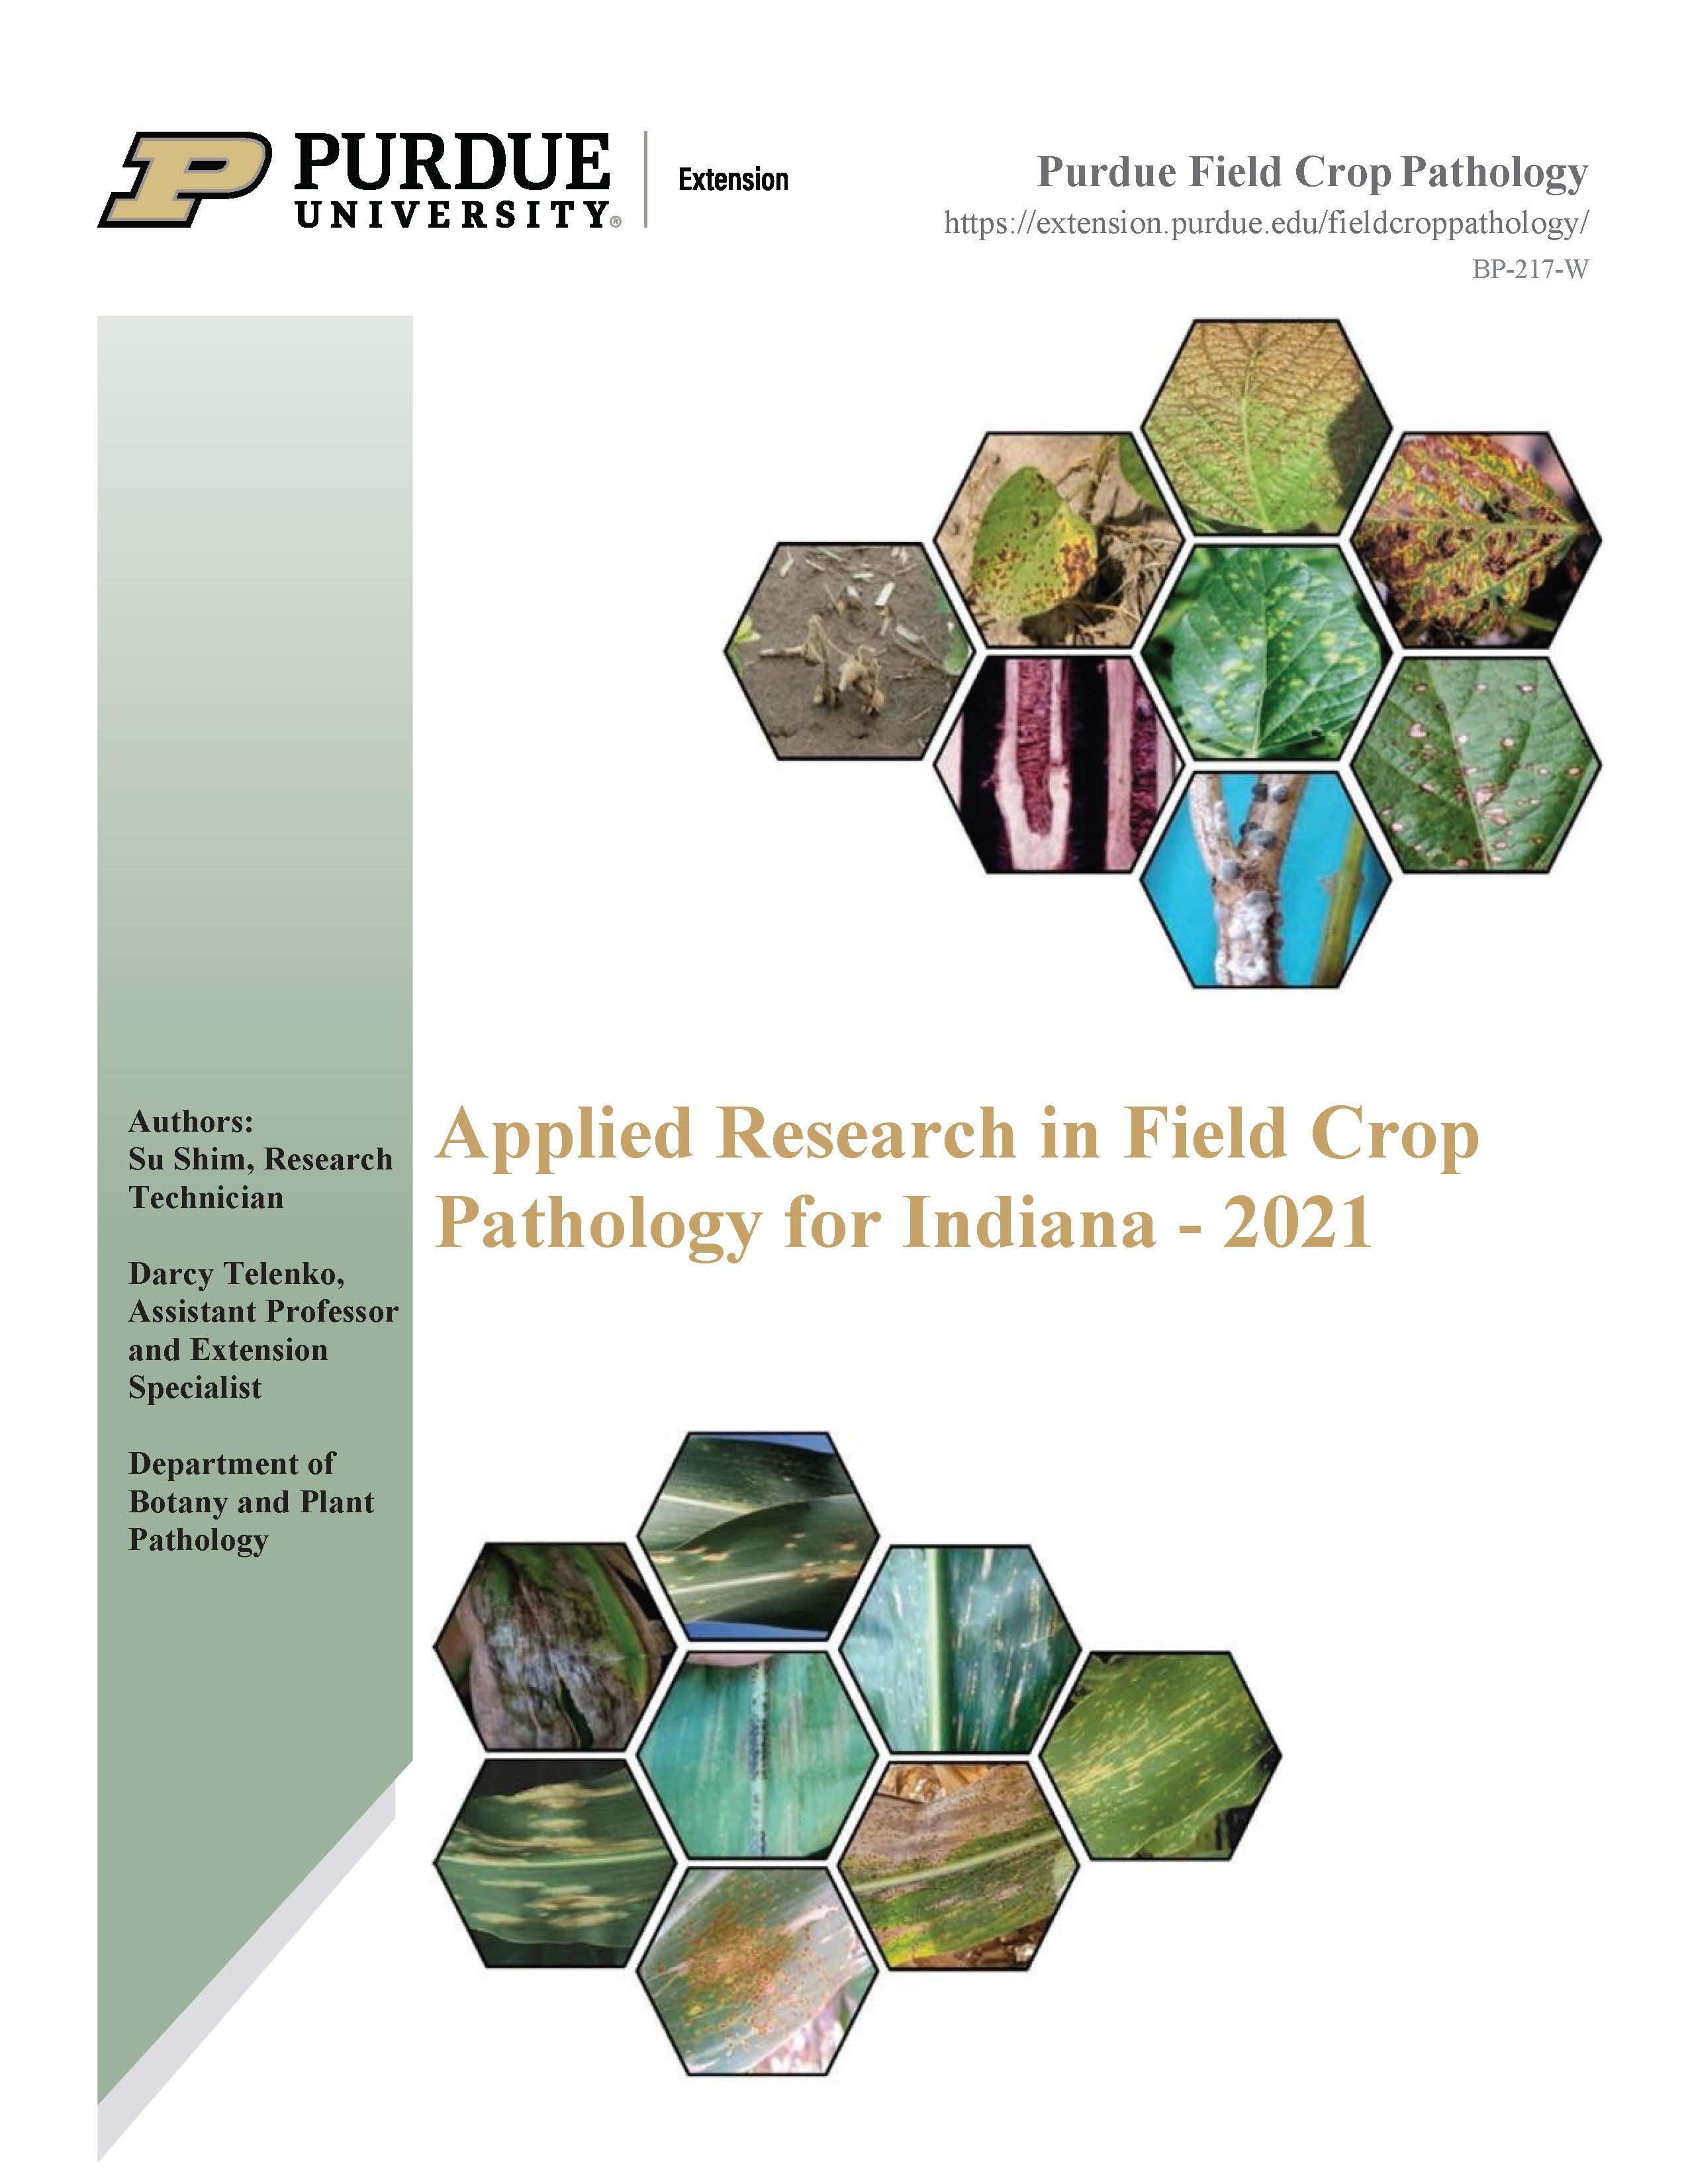 Applied Research in Field Crop Pathology for Indiana - 2021